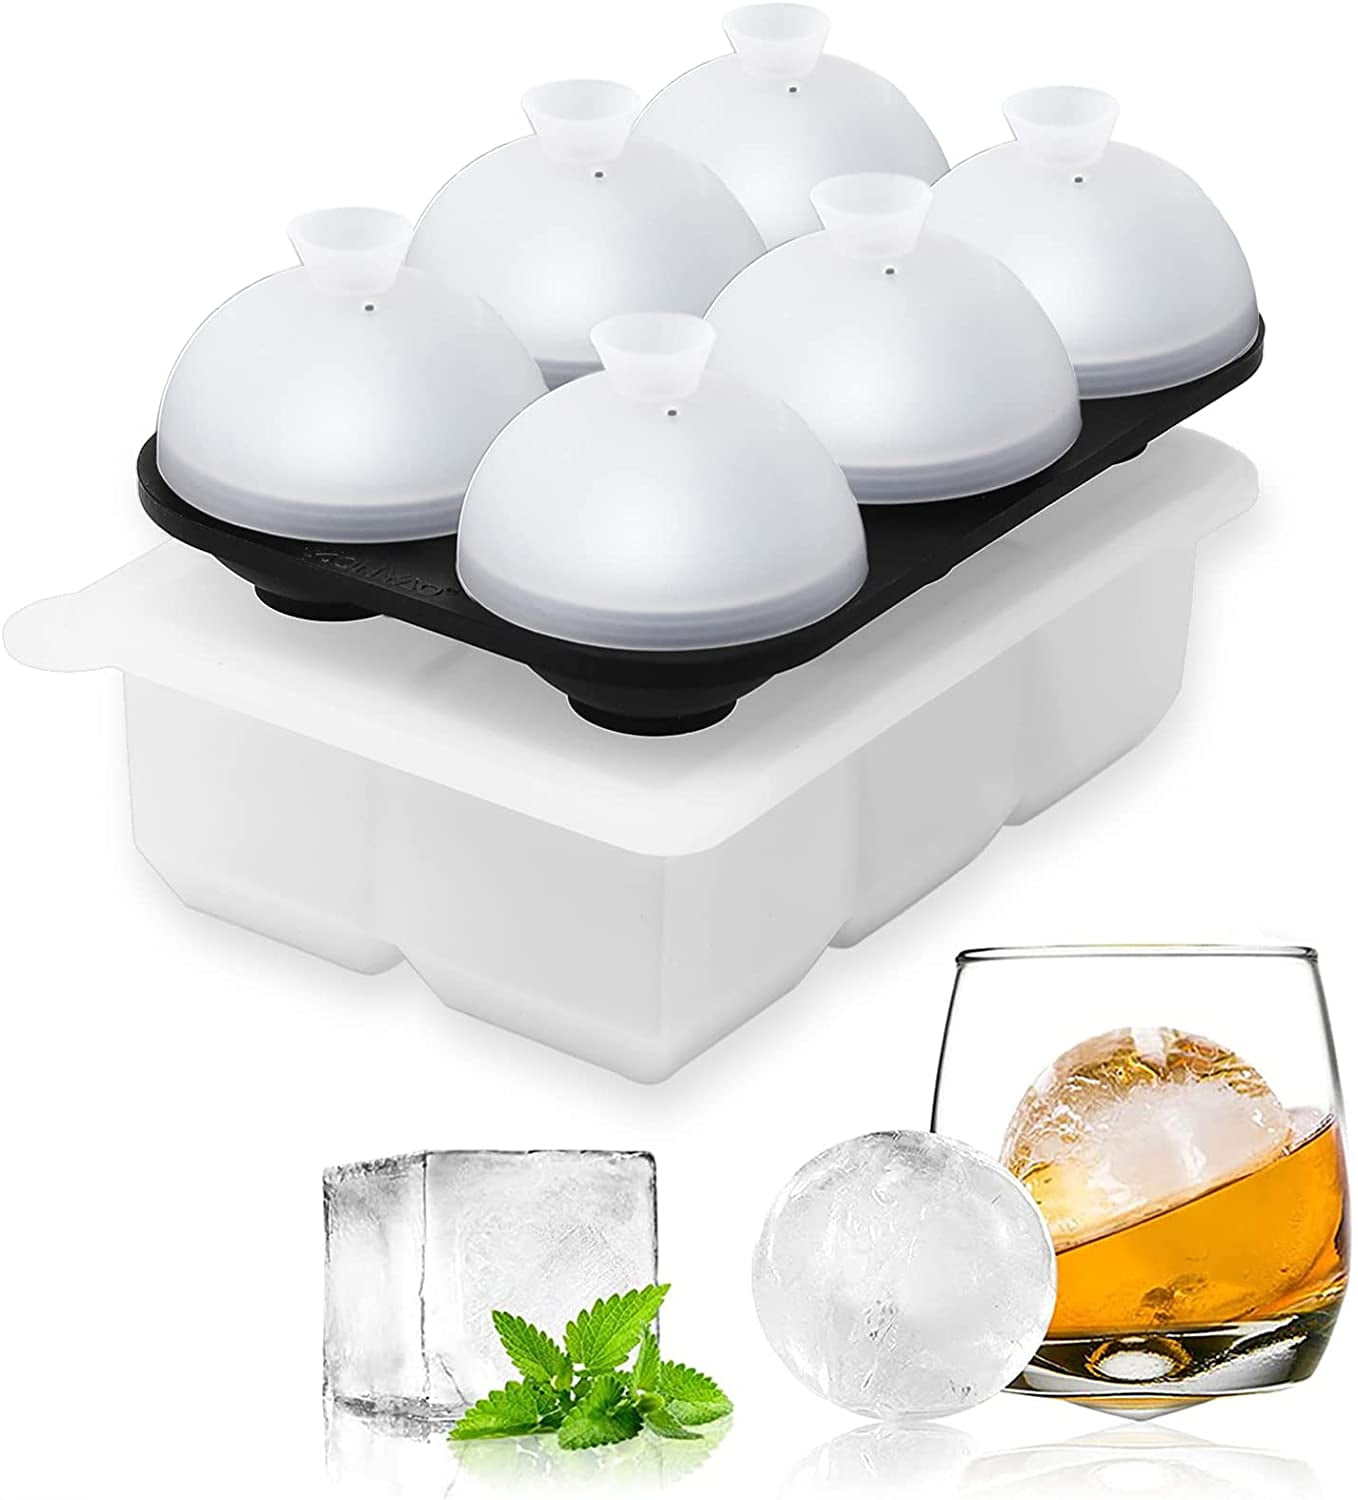 Viski Ice Mold, Sphere Shaped Ice Cupe Maker, Large Ice Cube for Cocktails,  DIY, Bath Bombs, and Chocolates, 2 Inch, Set of 4, Black